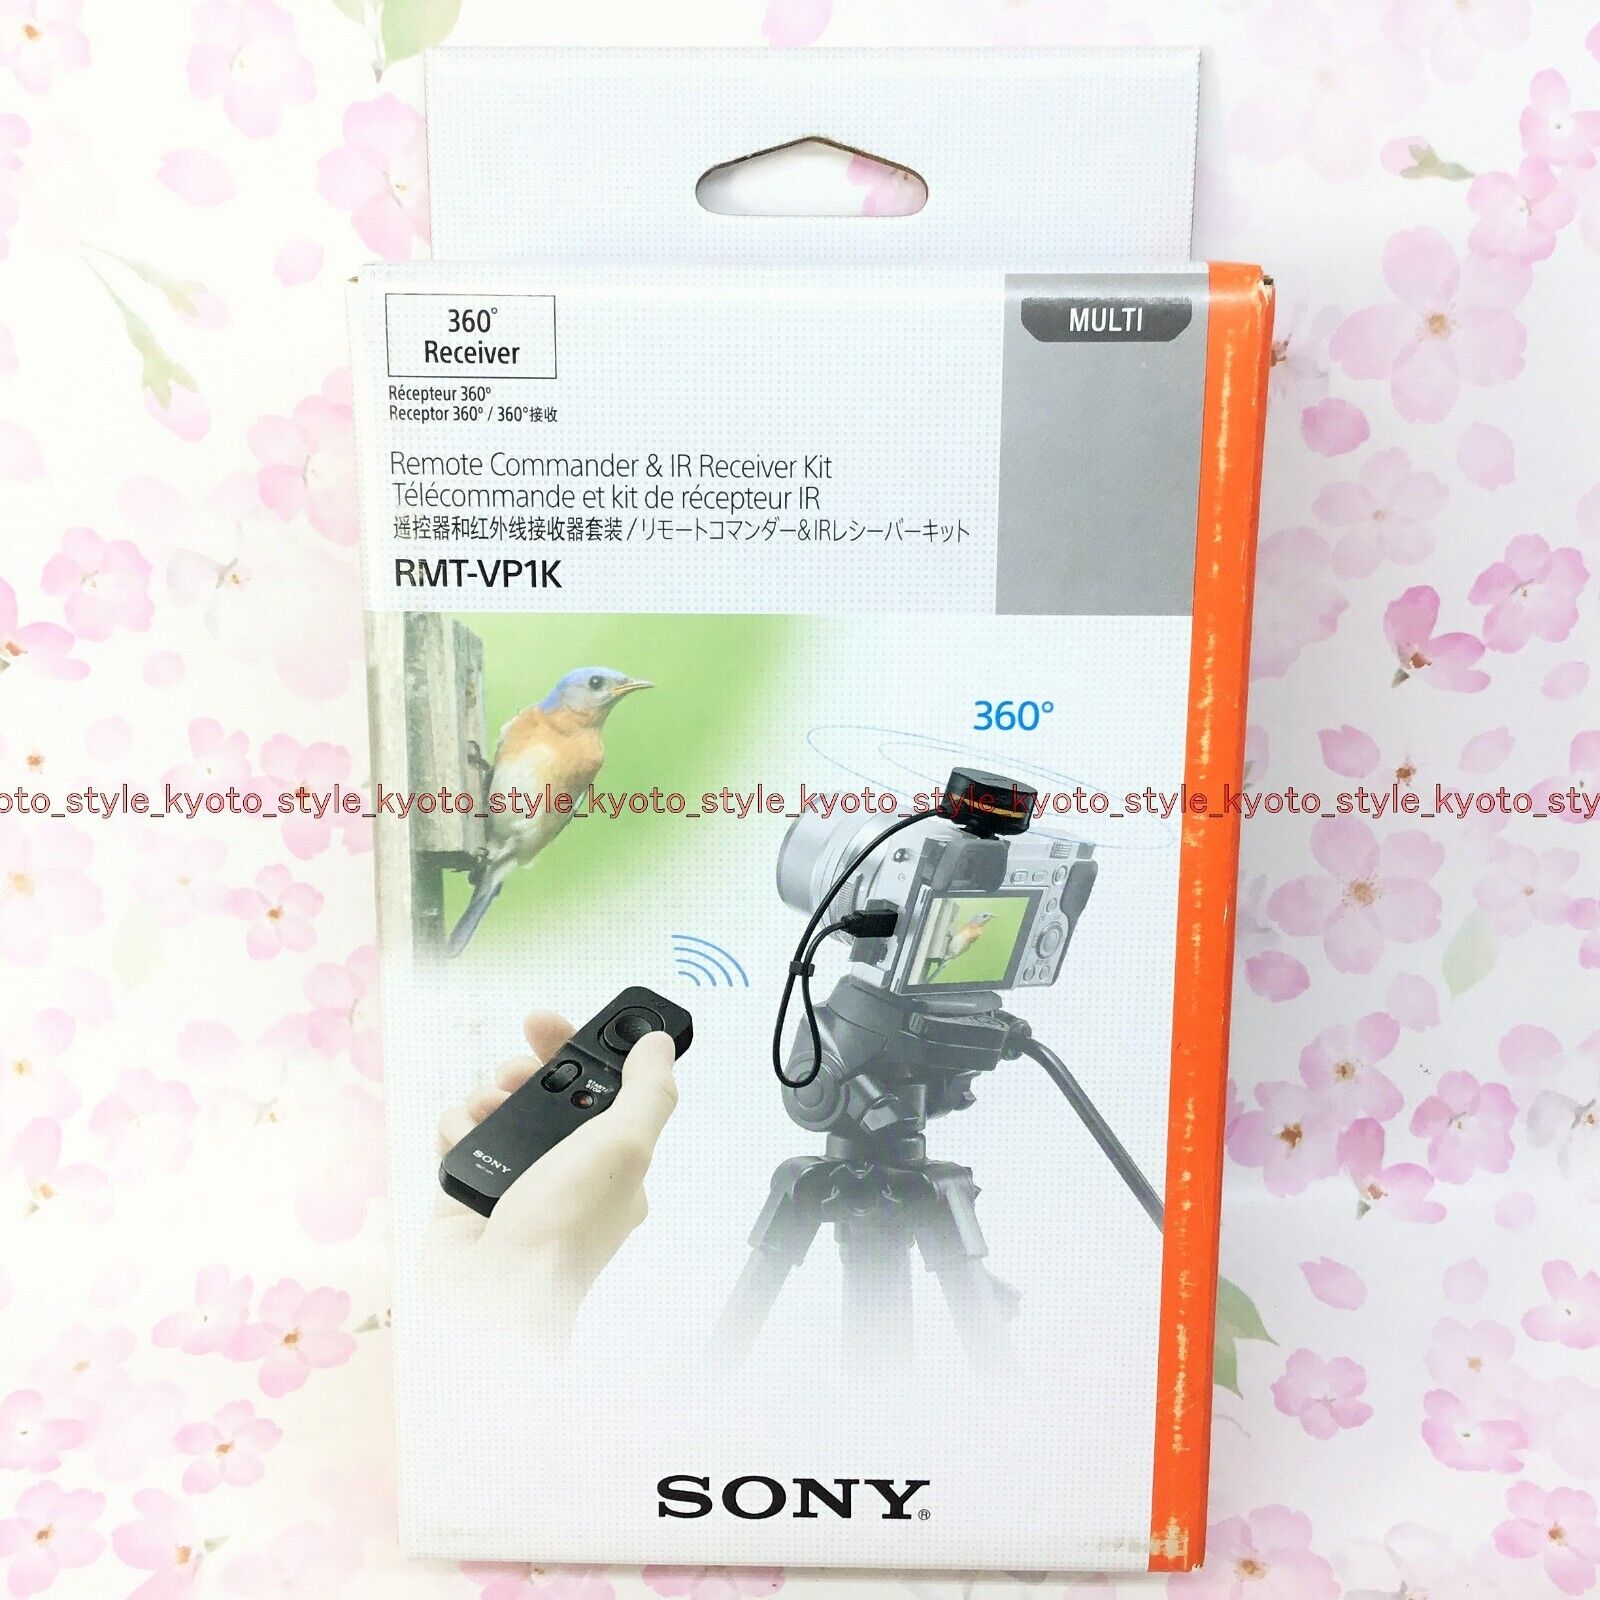 SONY RMT-VP1K Wireless Receiver and Remote Commander Kit 89953 JAPAN IMPORT